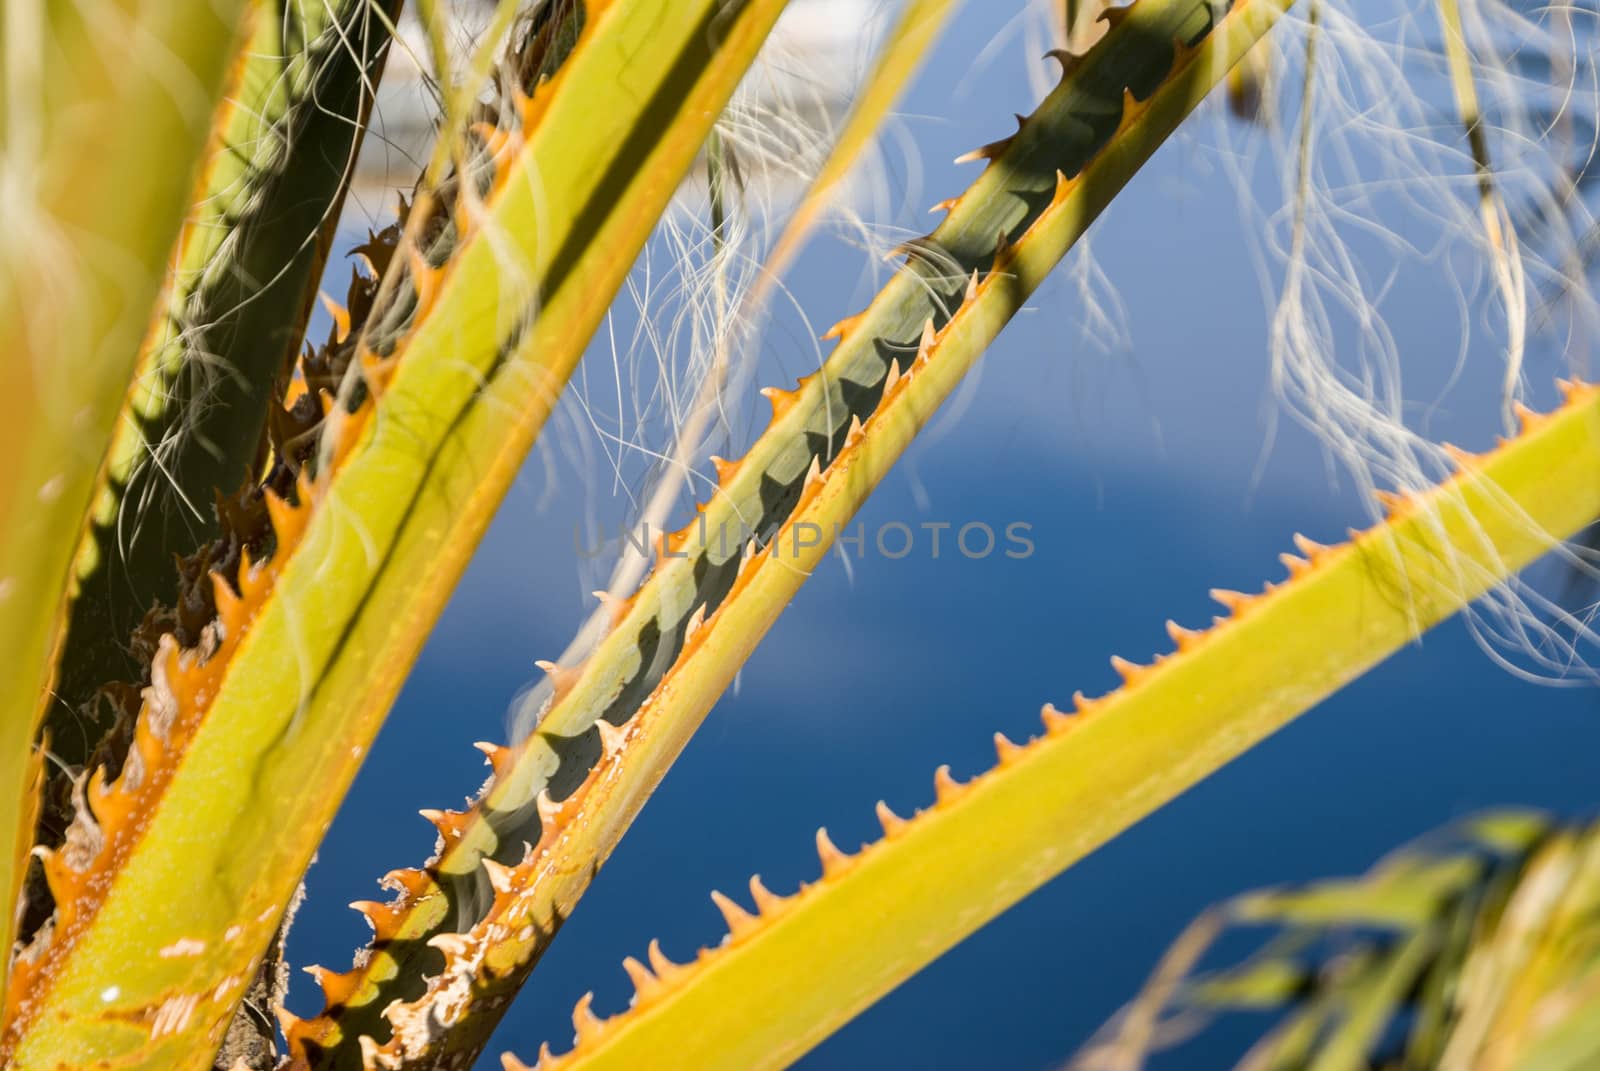 Spiney Palm Fronds by emattil